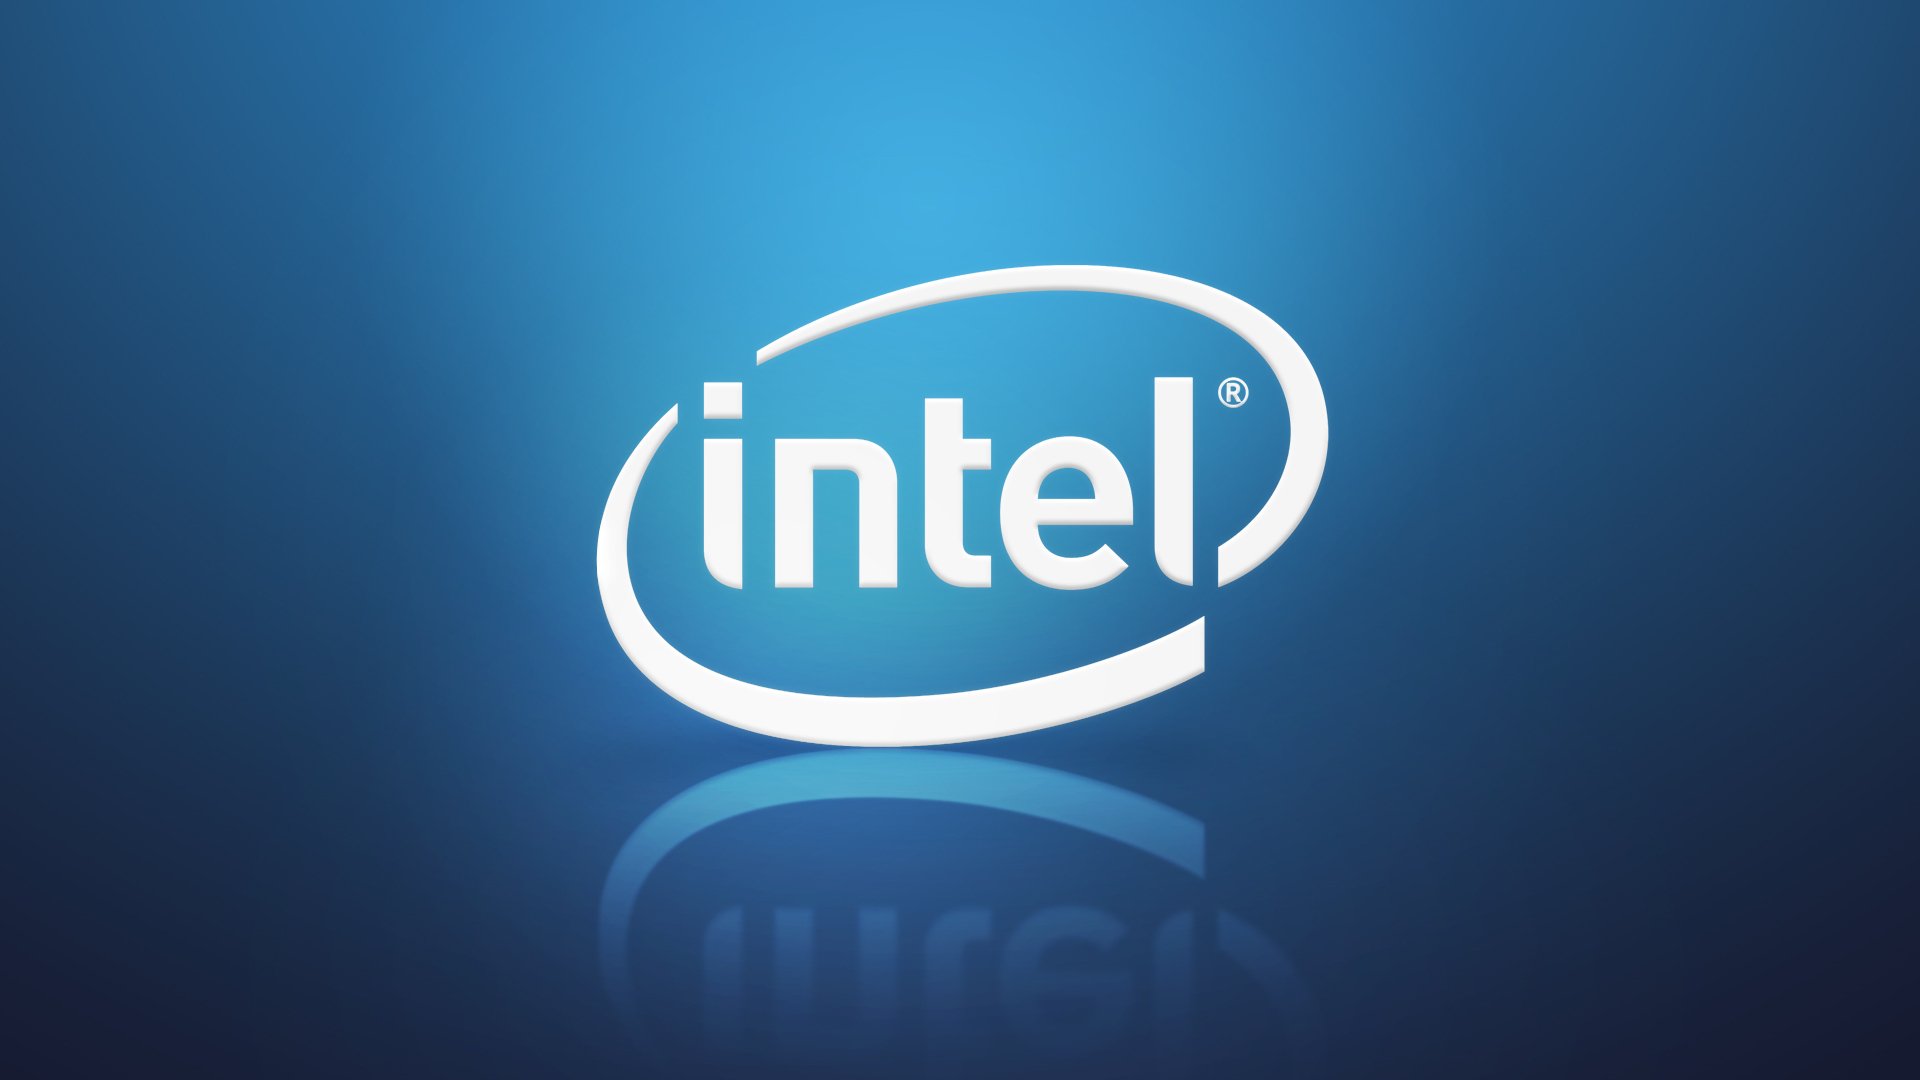 Intel Core i7-12700H outperforms Apple M1 Max in performance